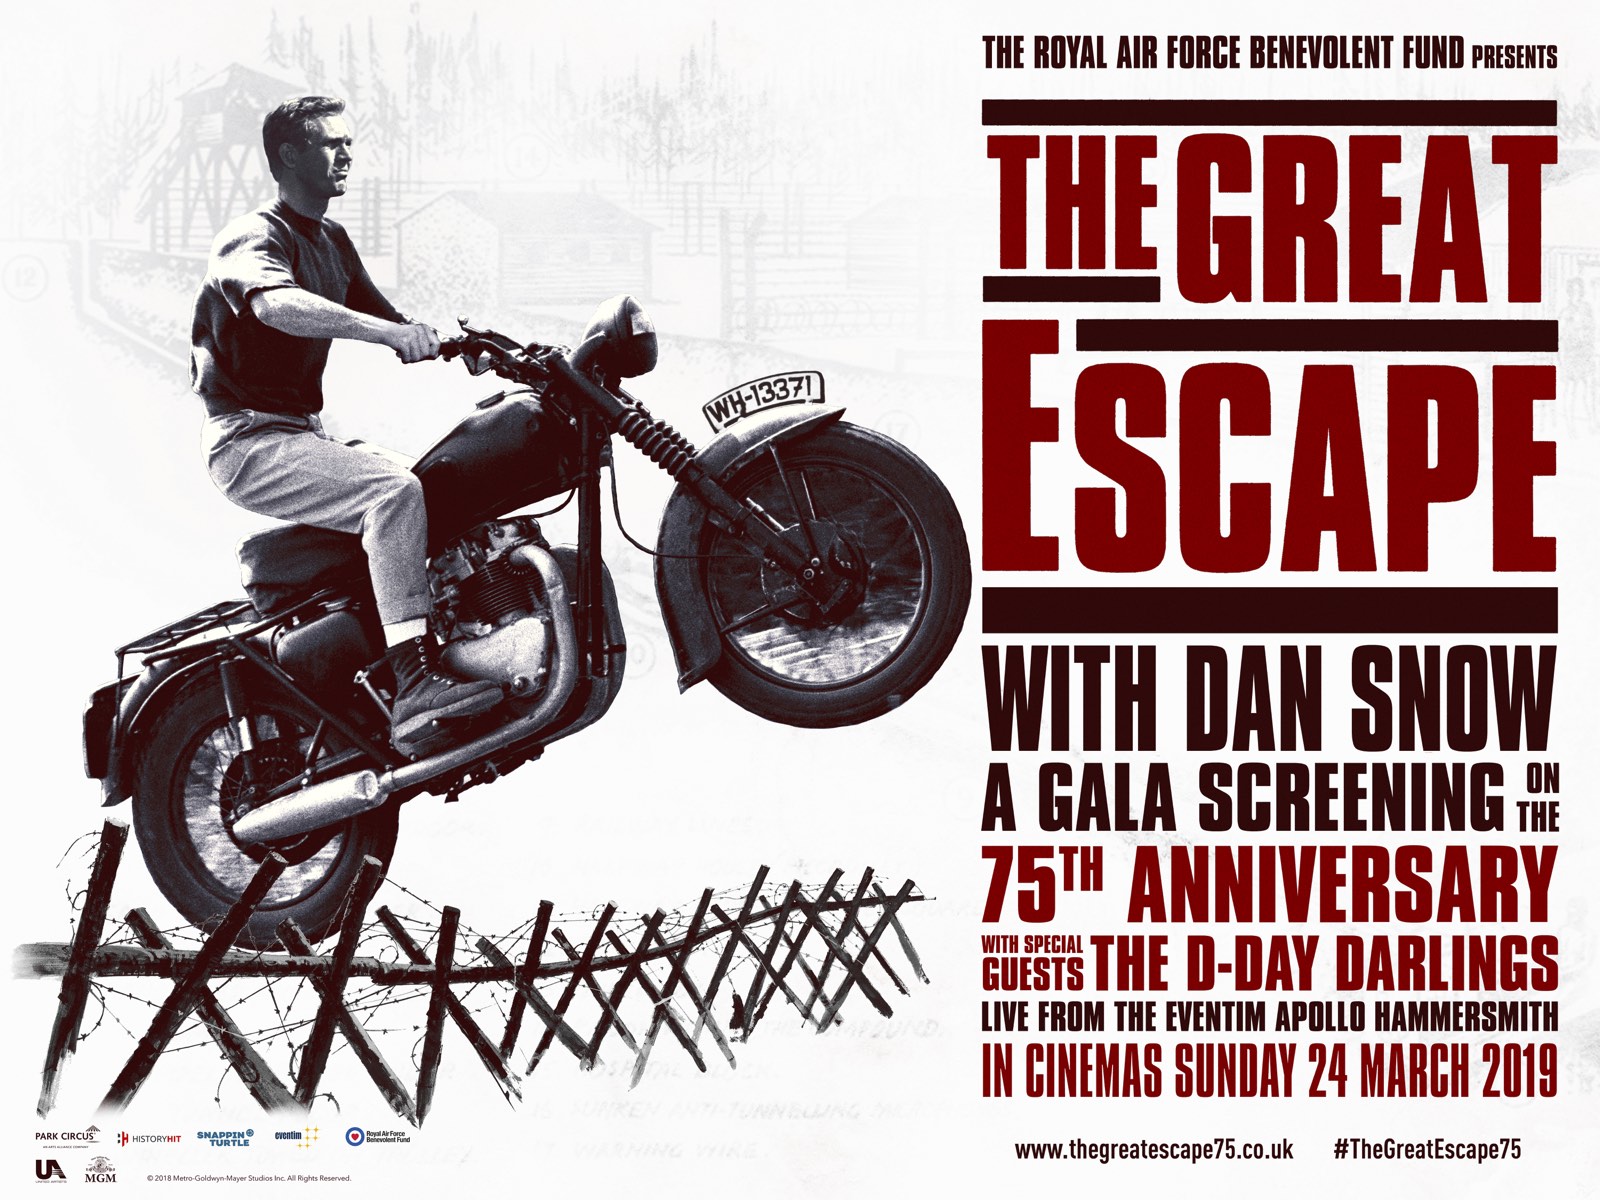 The Great Escape with Dan Snow